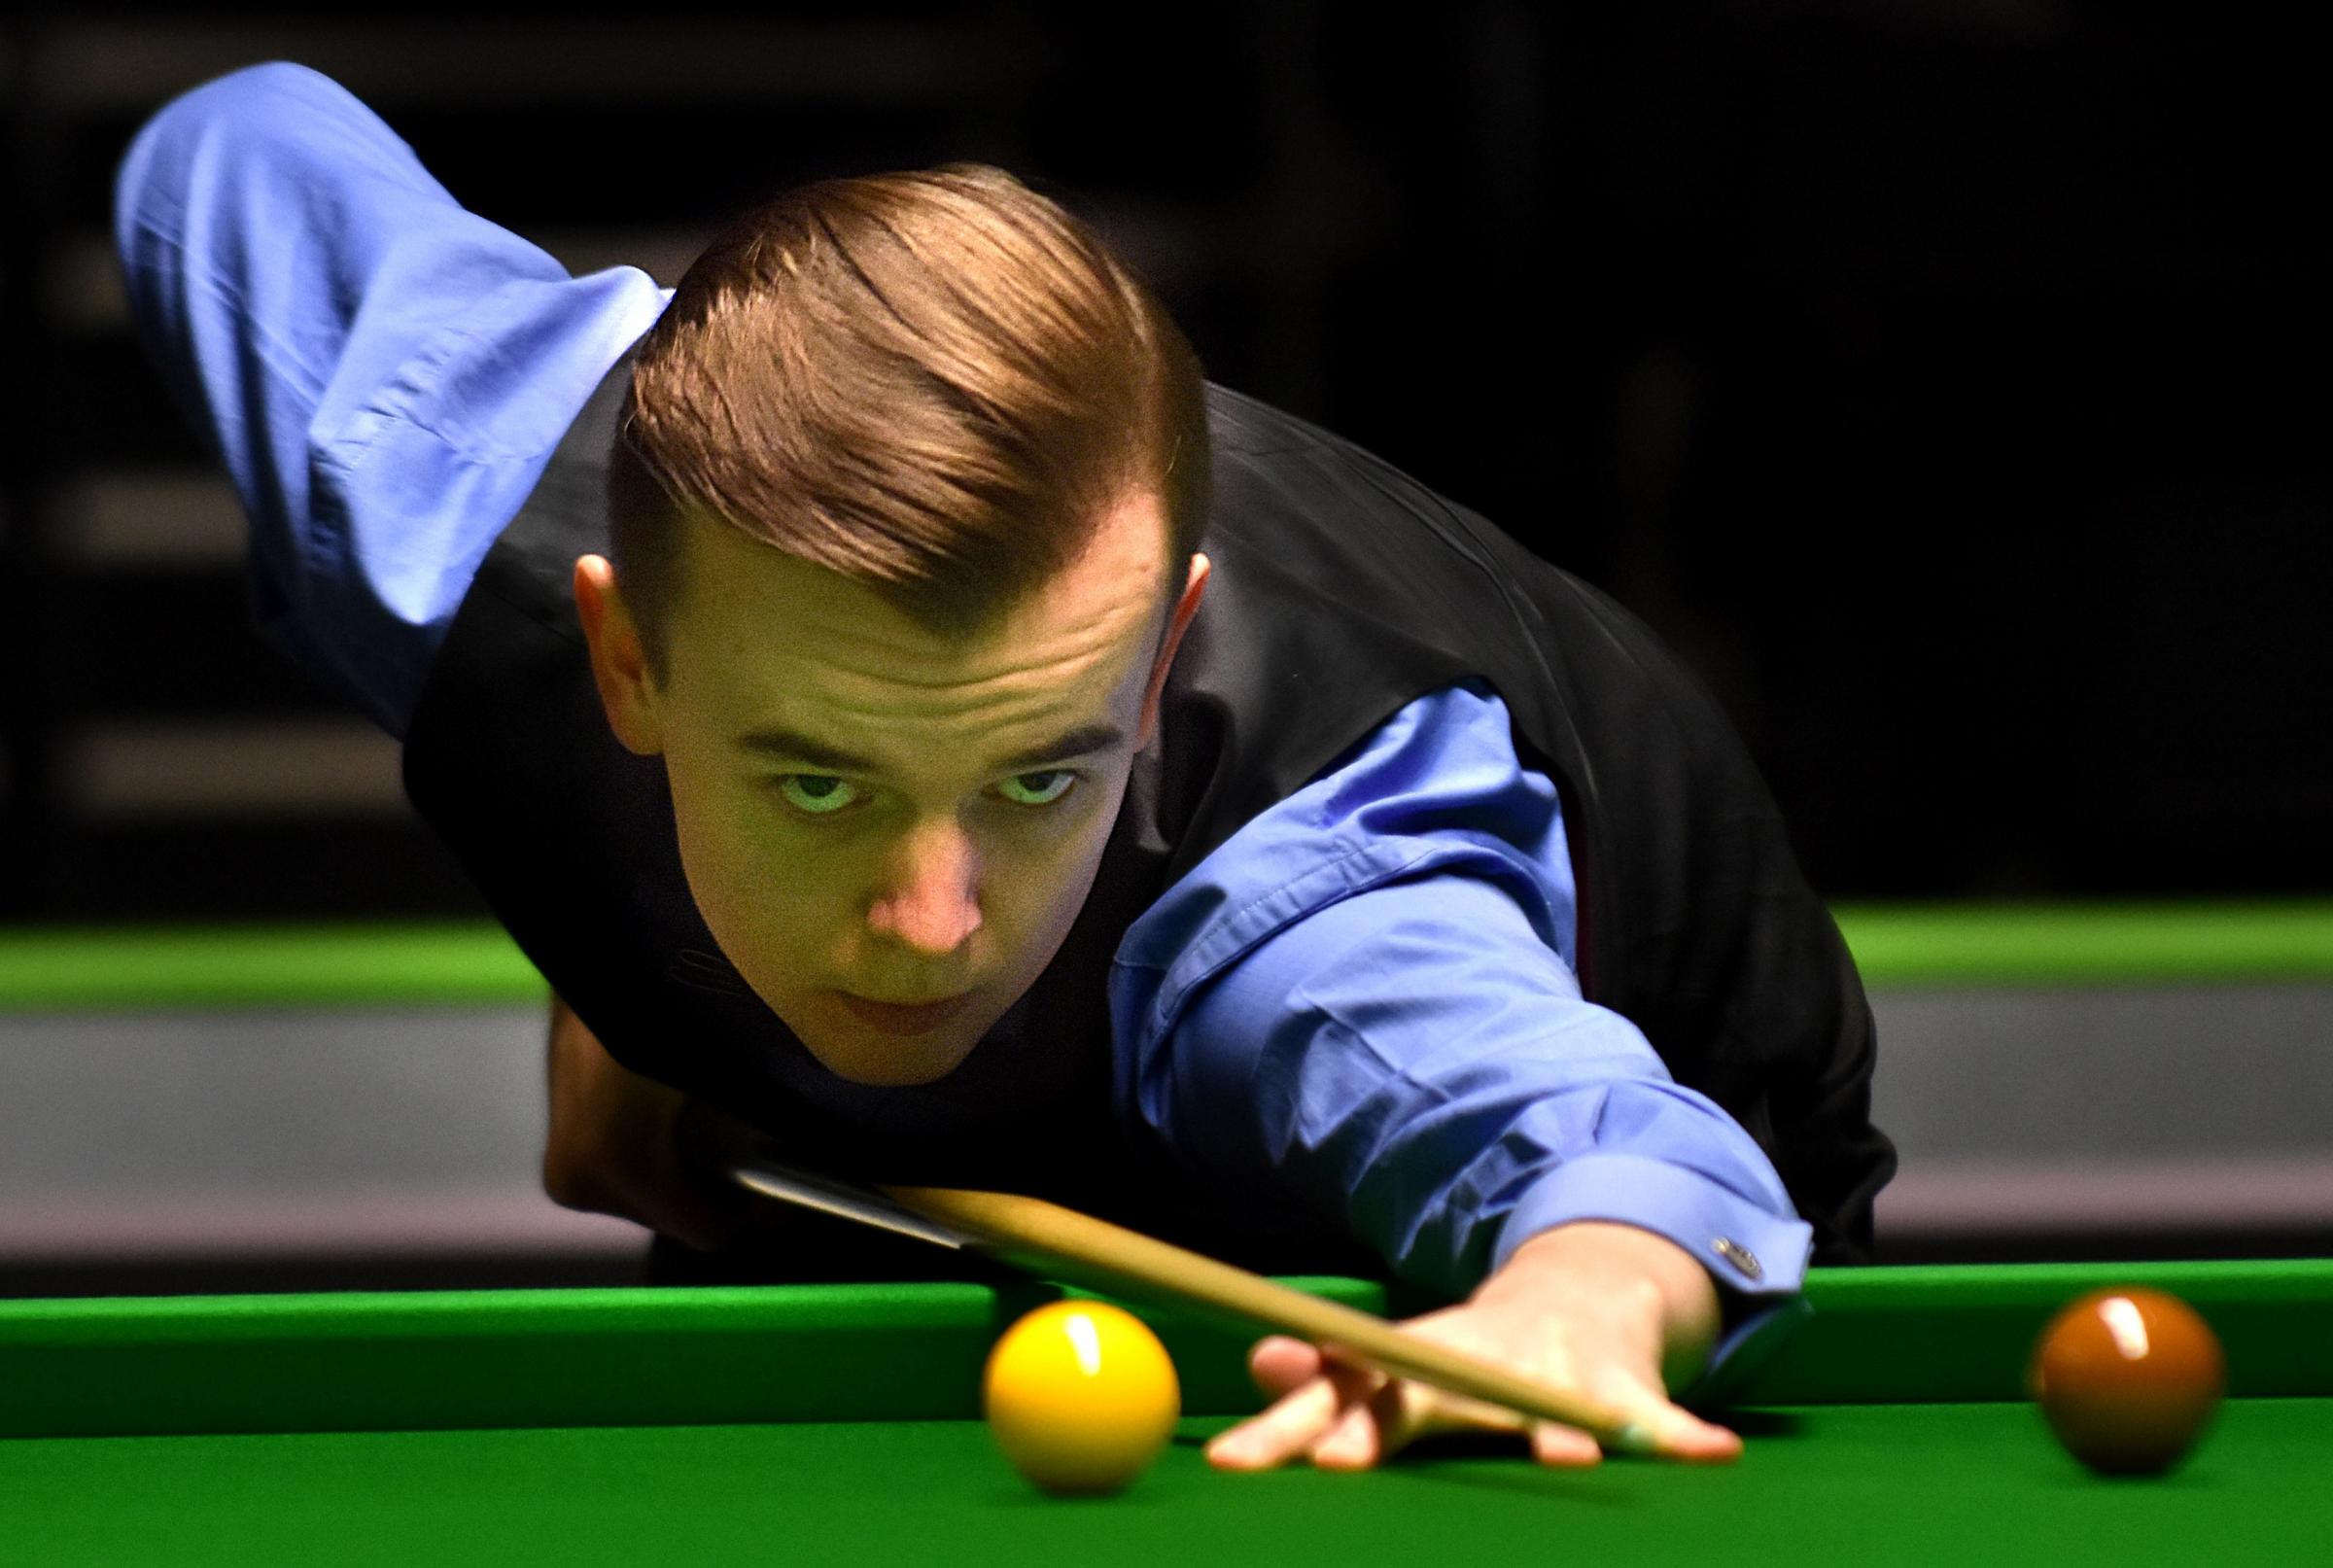 SNOOKER Hugill progresses to round two of the Shoot Out York Press